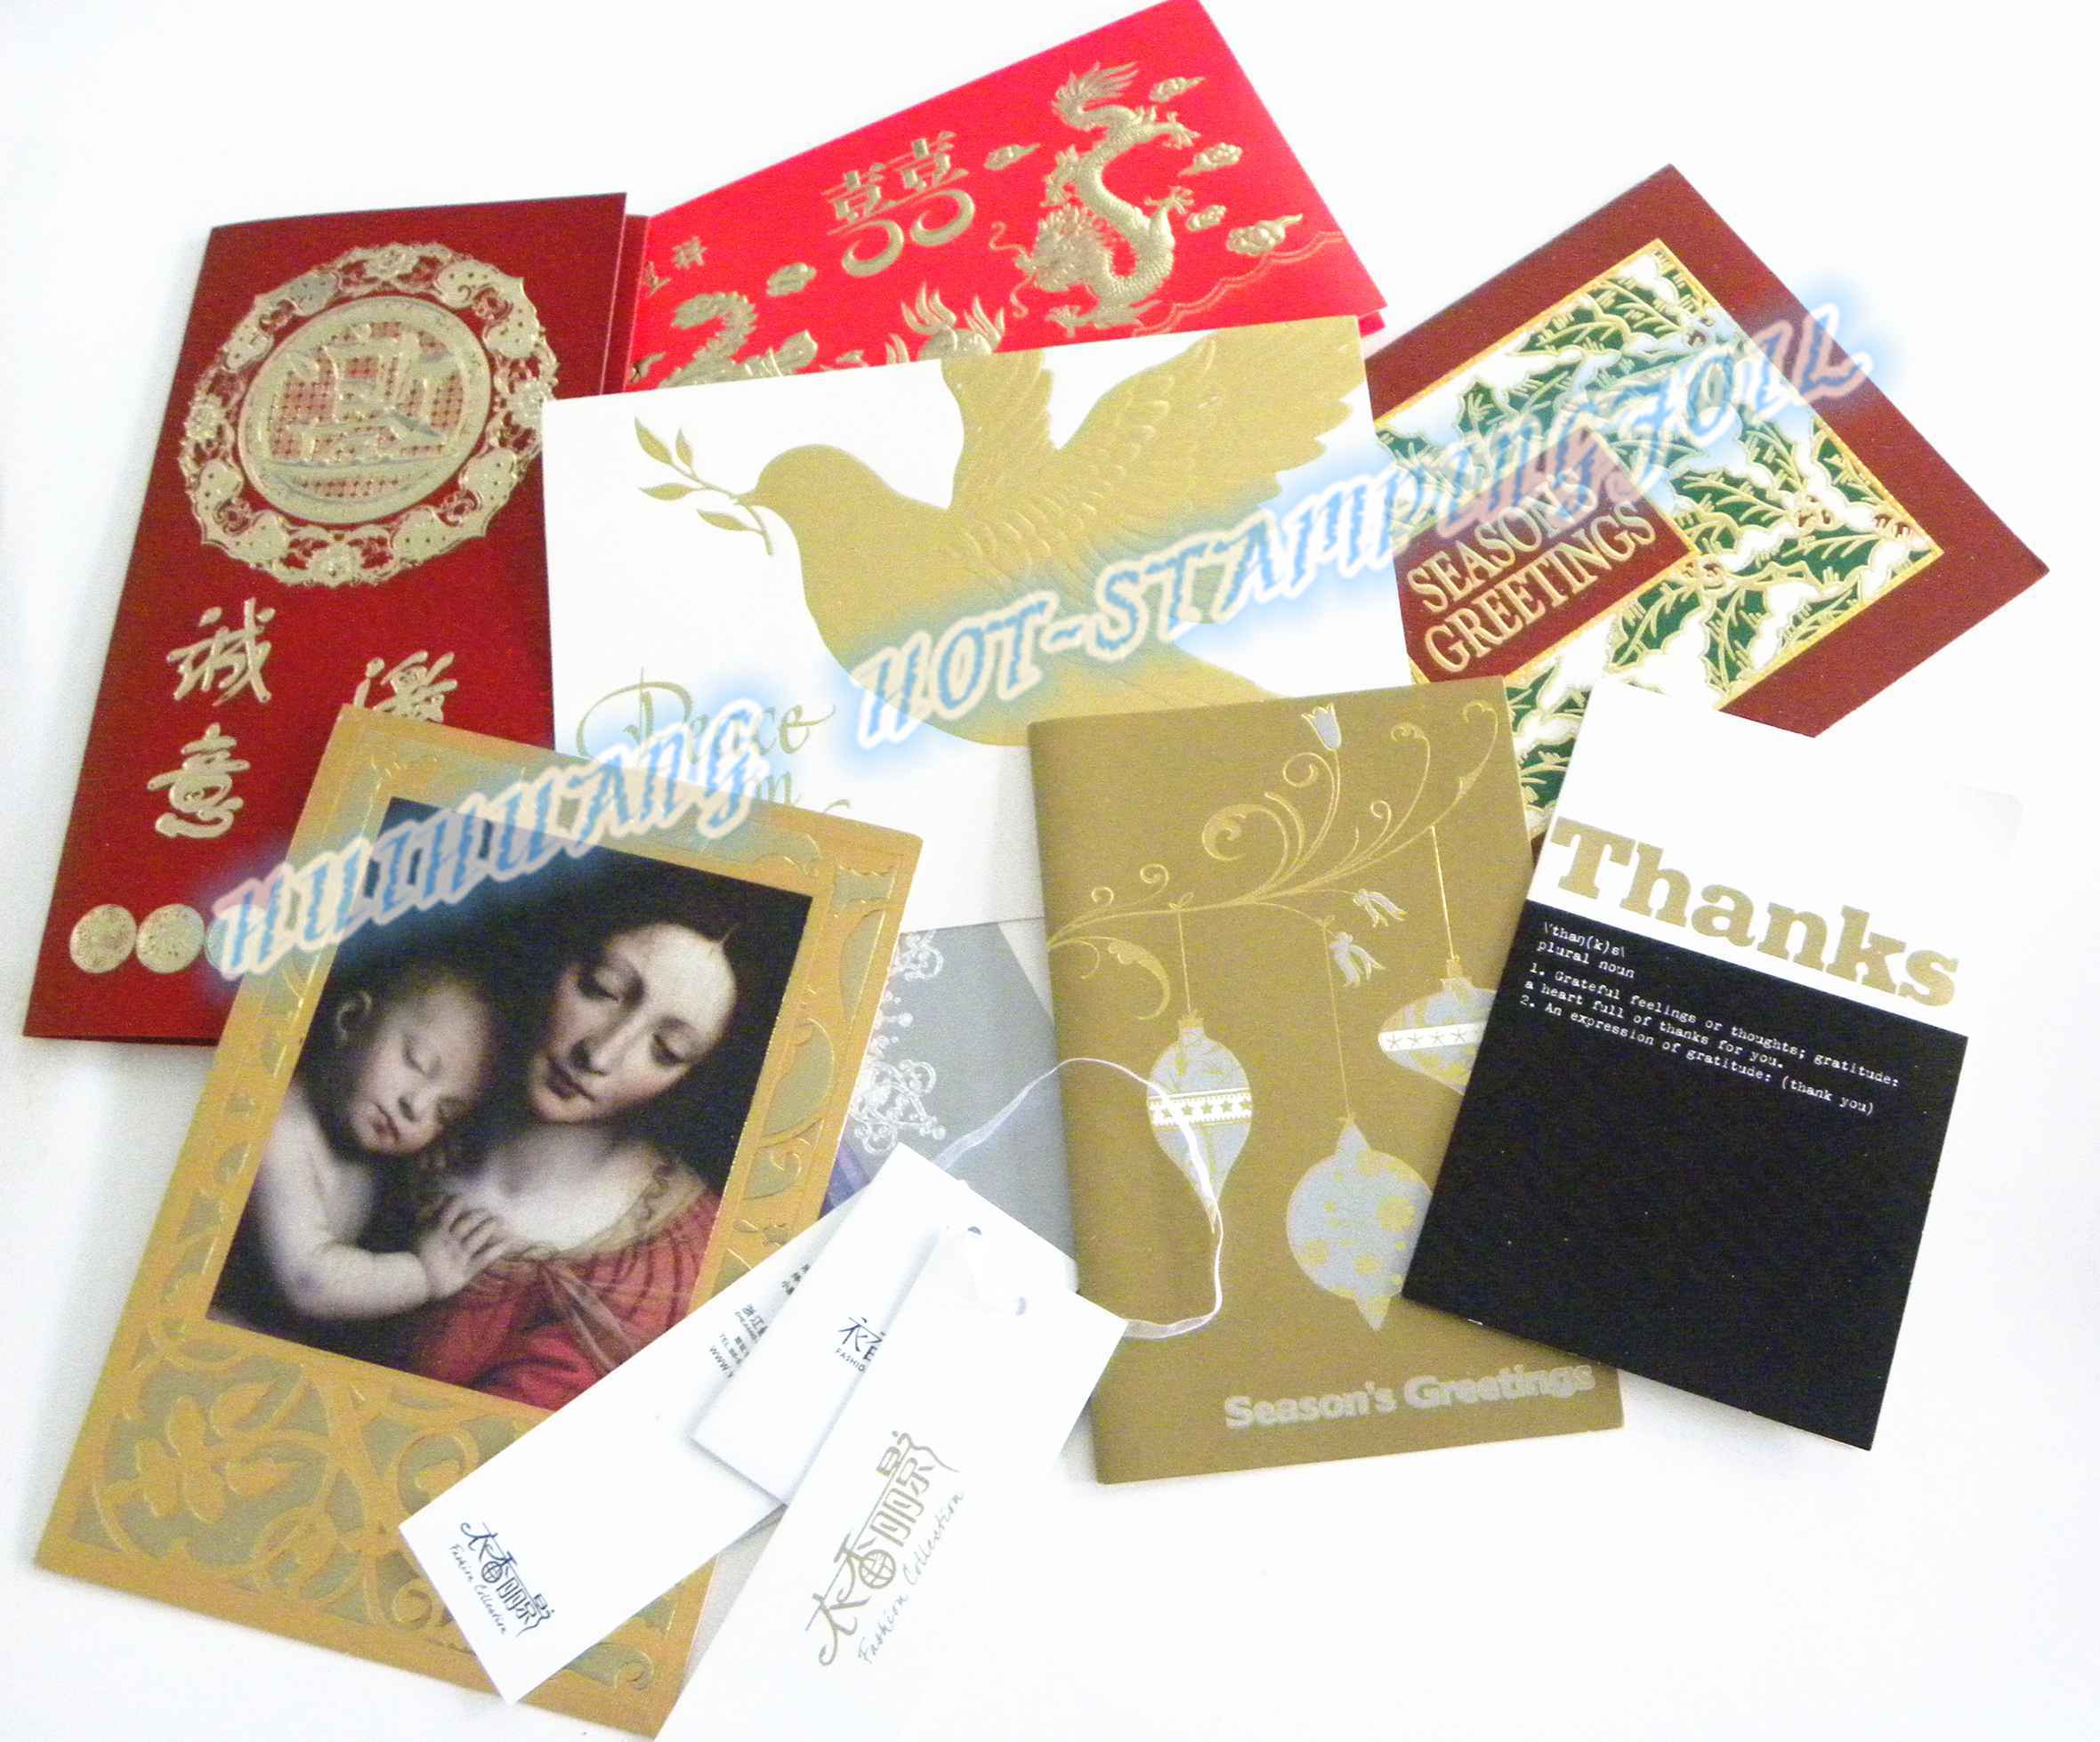 Hot stamping foil for Greeting card